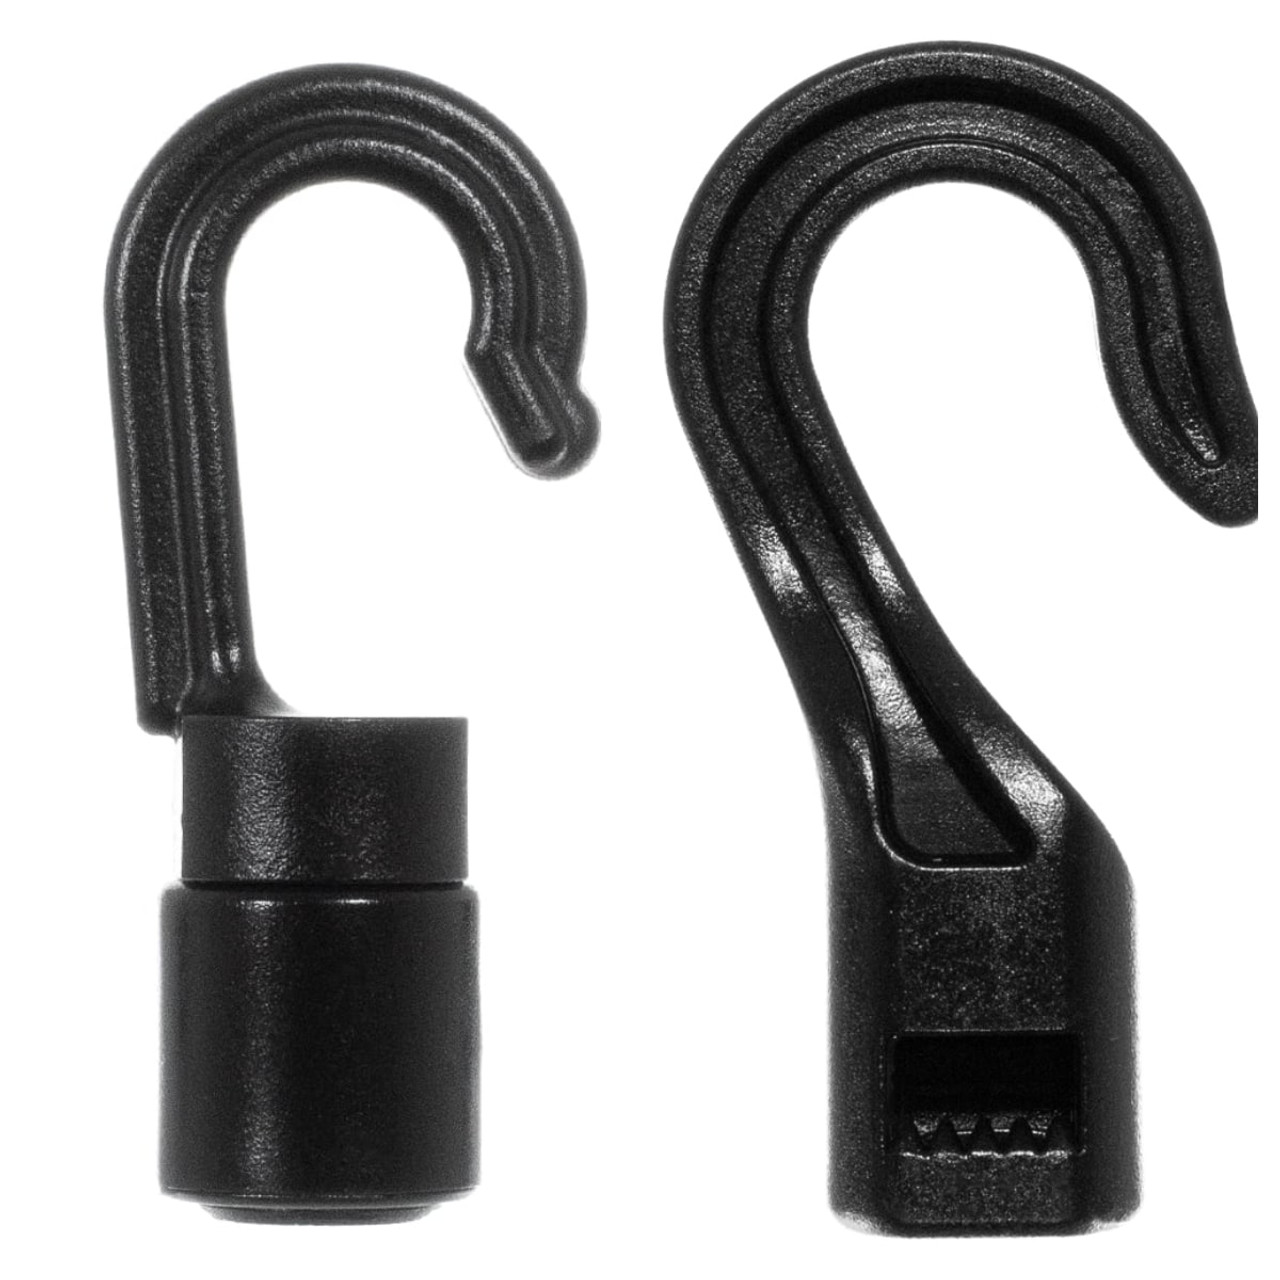 West Coast Paracord Black Hard Plastic Cord End Hooks with Open, Non-Locking Closure (10 Pack)